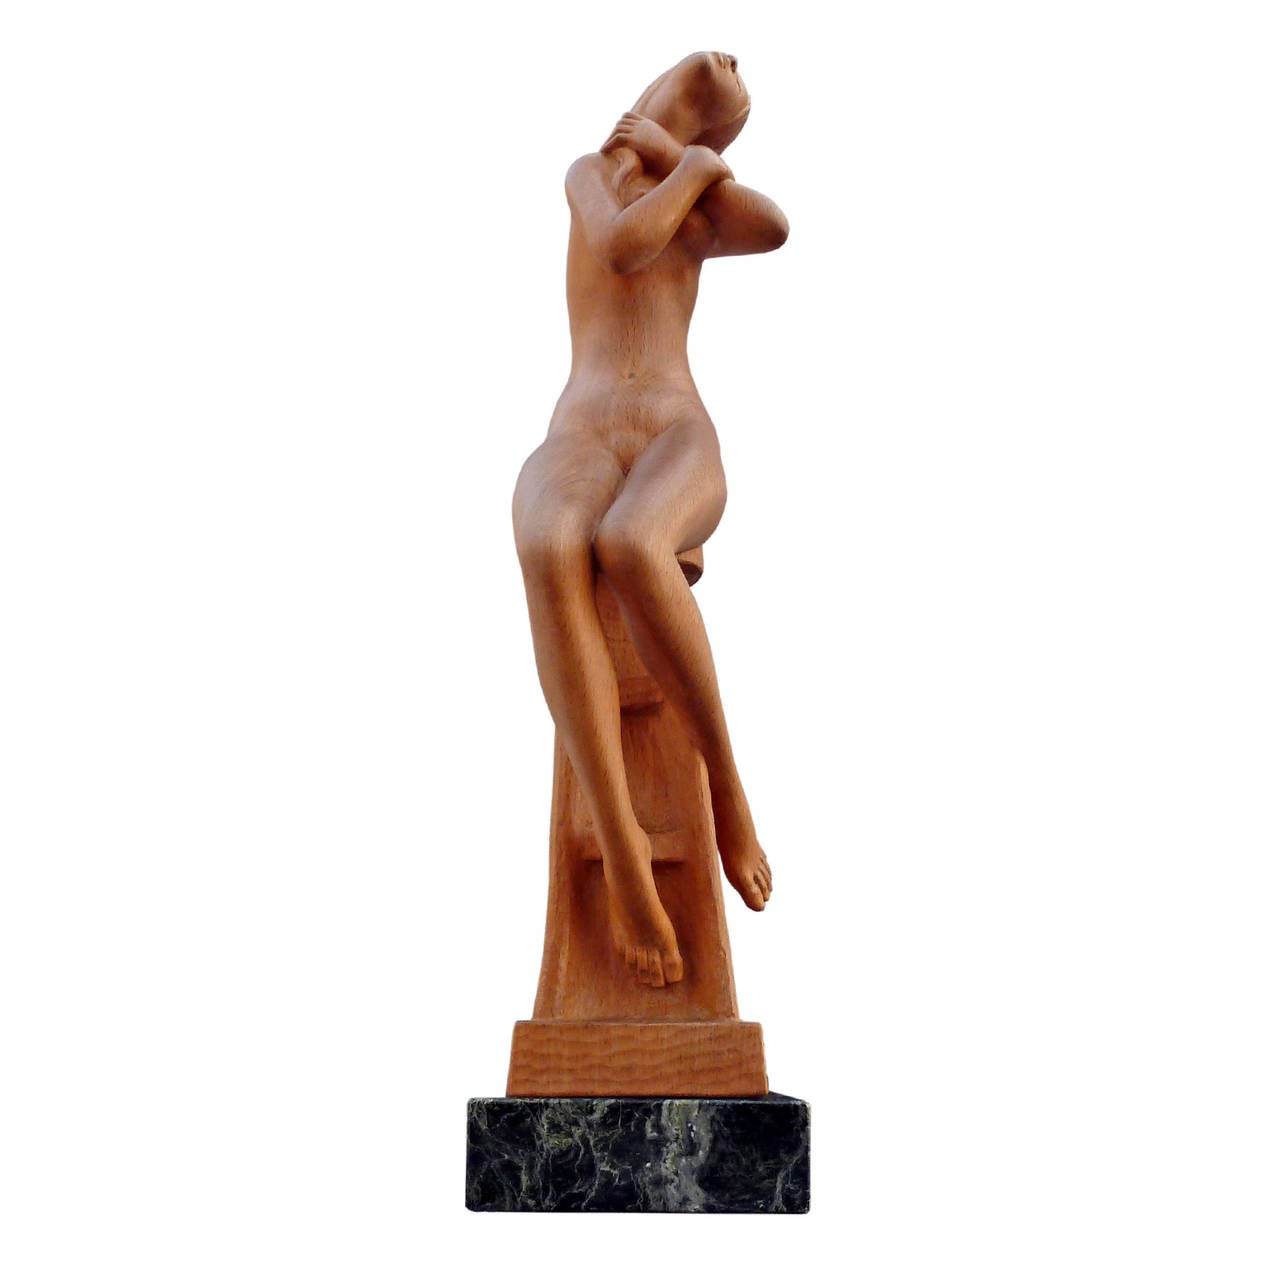 Spanish Luis Sanguino Hand-Carved Mahogany Sculpture of a Nude Woman